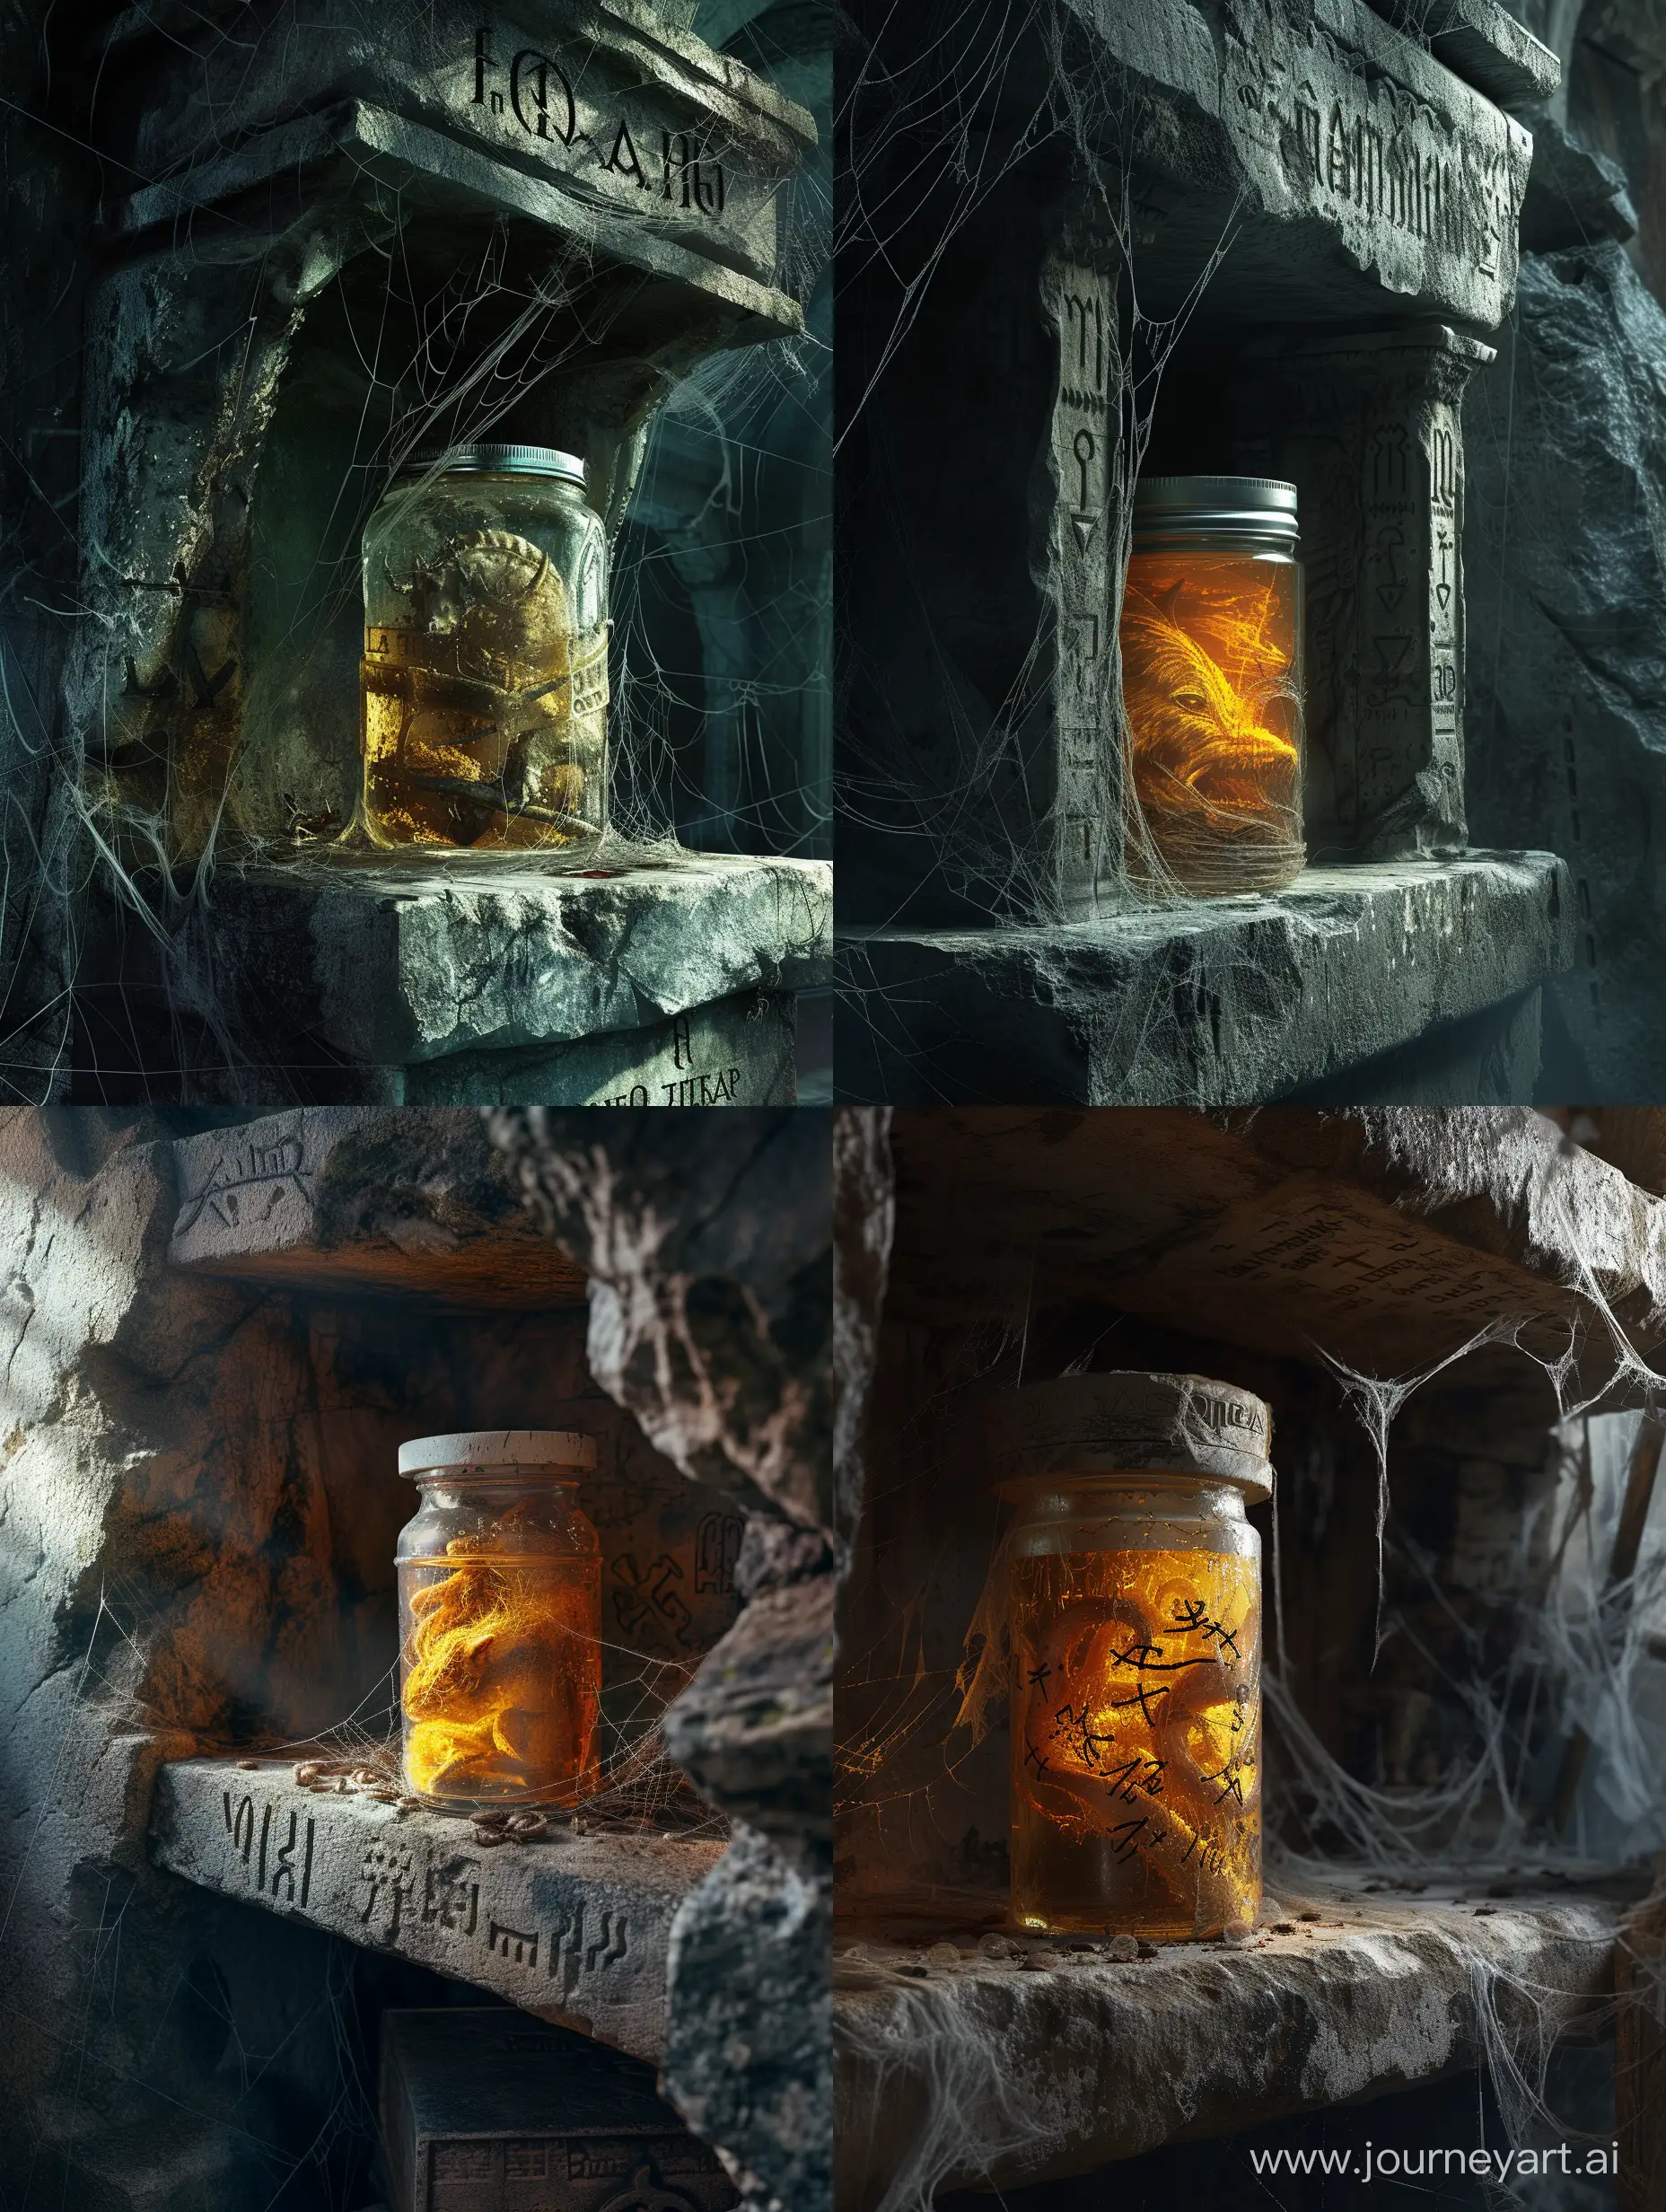 Terrifying-Ancient-Beasts-Preserved-in-Jars-on-Stone-Shelves